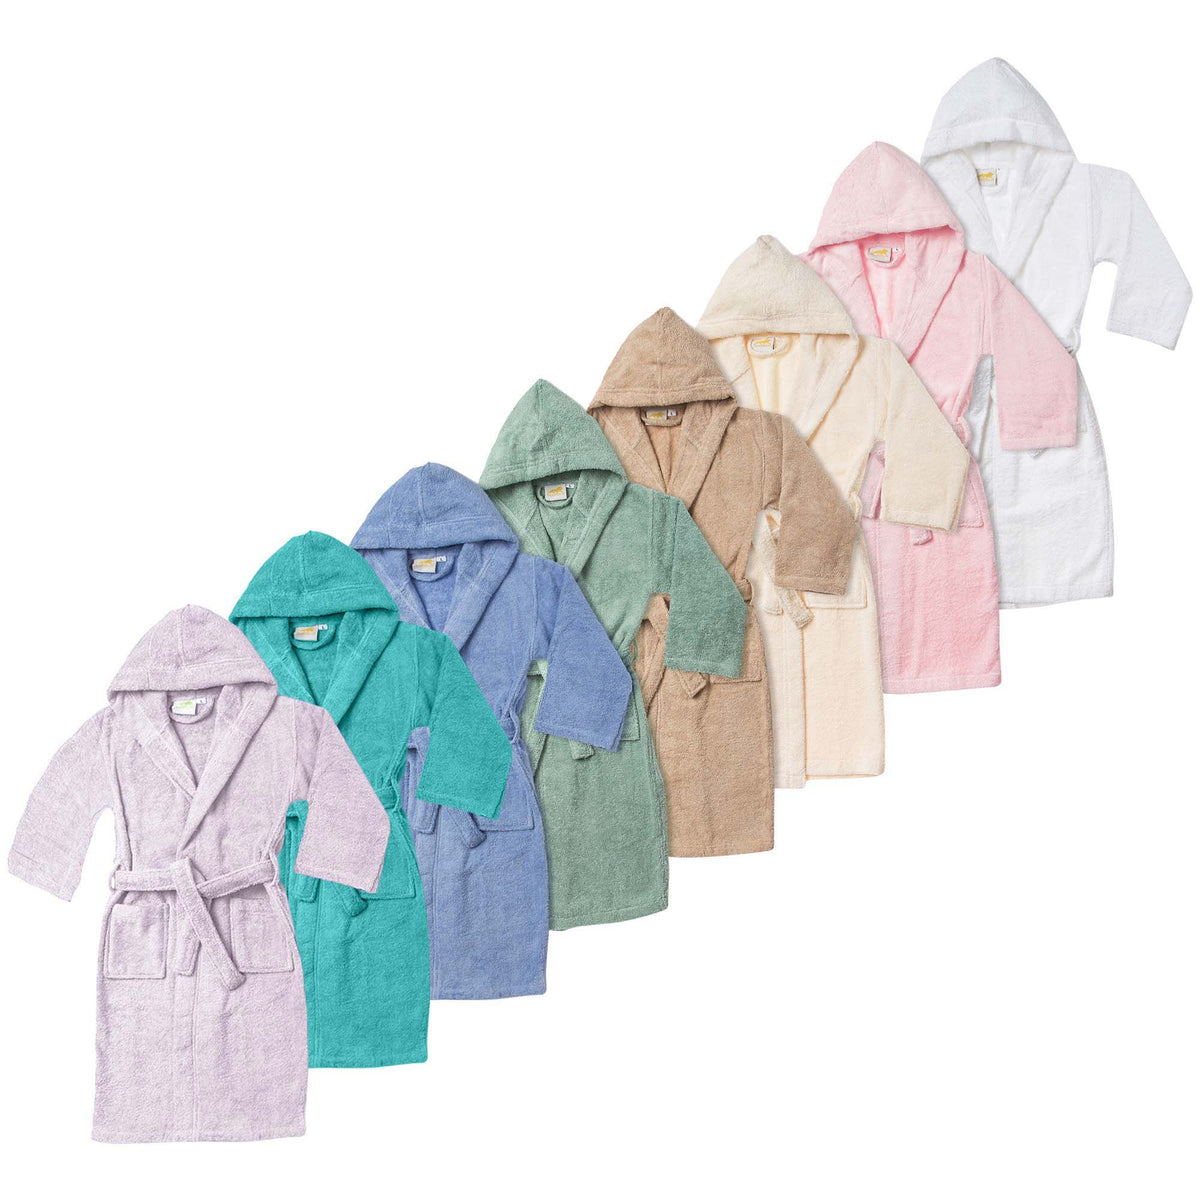 Cute Vegetable Pattern Cotton Robe Towel For Childrens Bathroom Soft Long  Sleeved Hoodie, Kimono Pajama Jacket, Bath Blanket, And Childrens Towel  Poncho Z230819 From Mengqiqi07, $9.45 | DHgate.Com